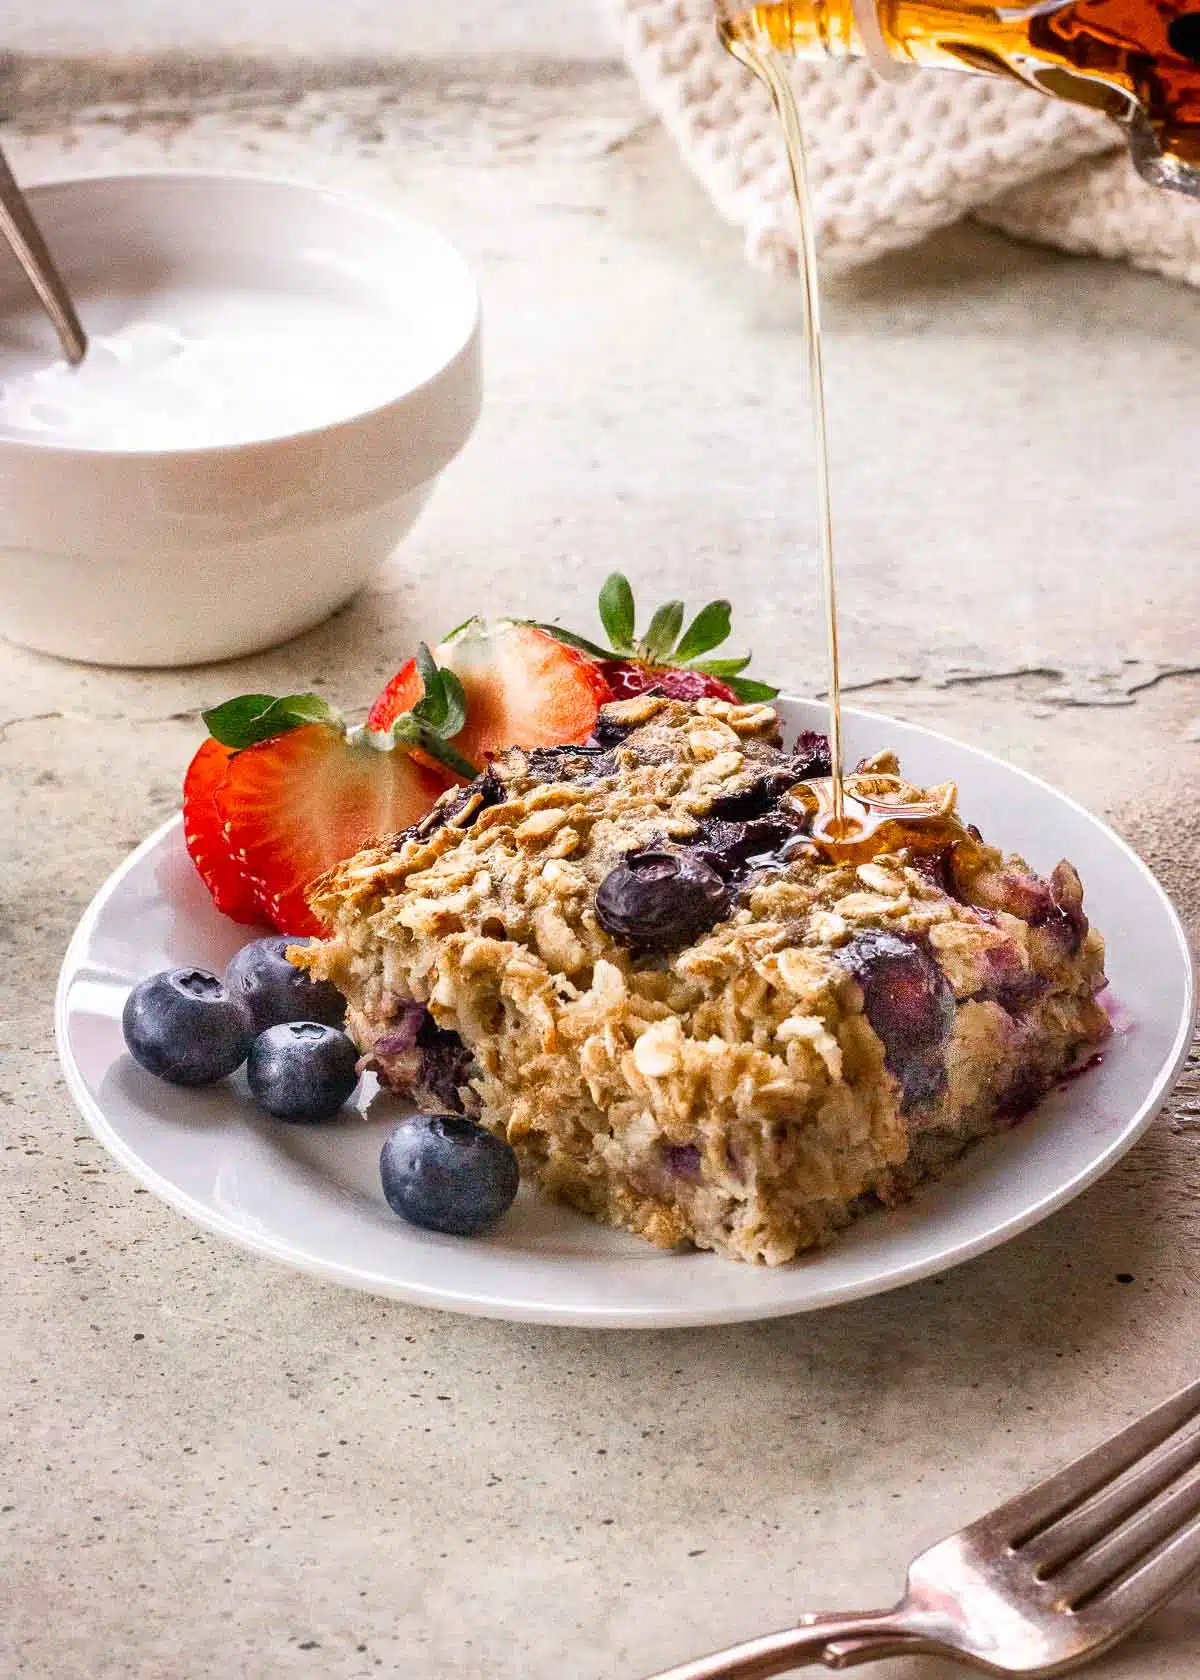 A slice of vegan baked oatmeal on a plate surrounded by strawberries and blueberries, and being drizzled with maple syrup.